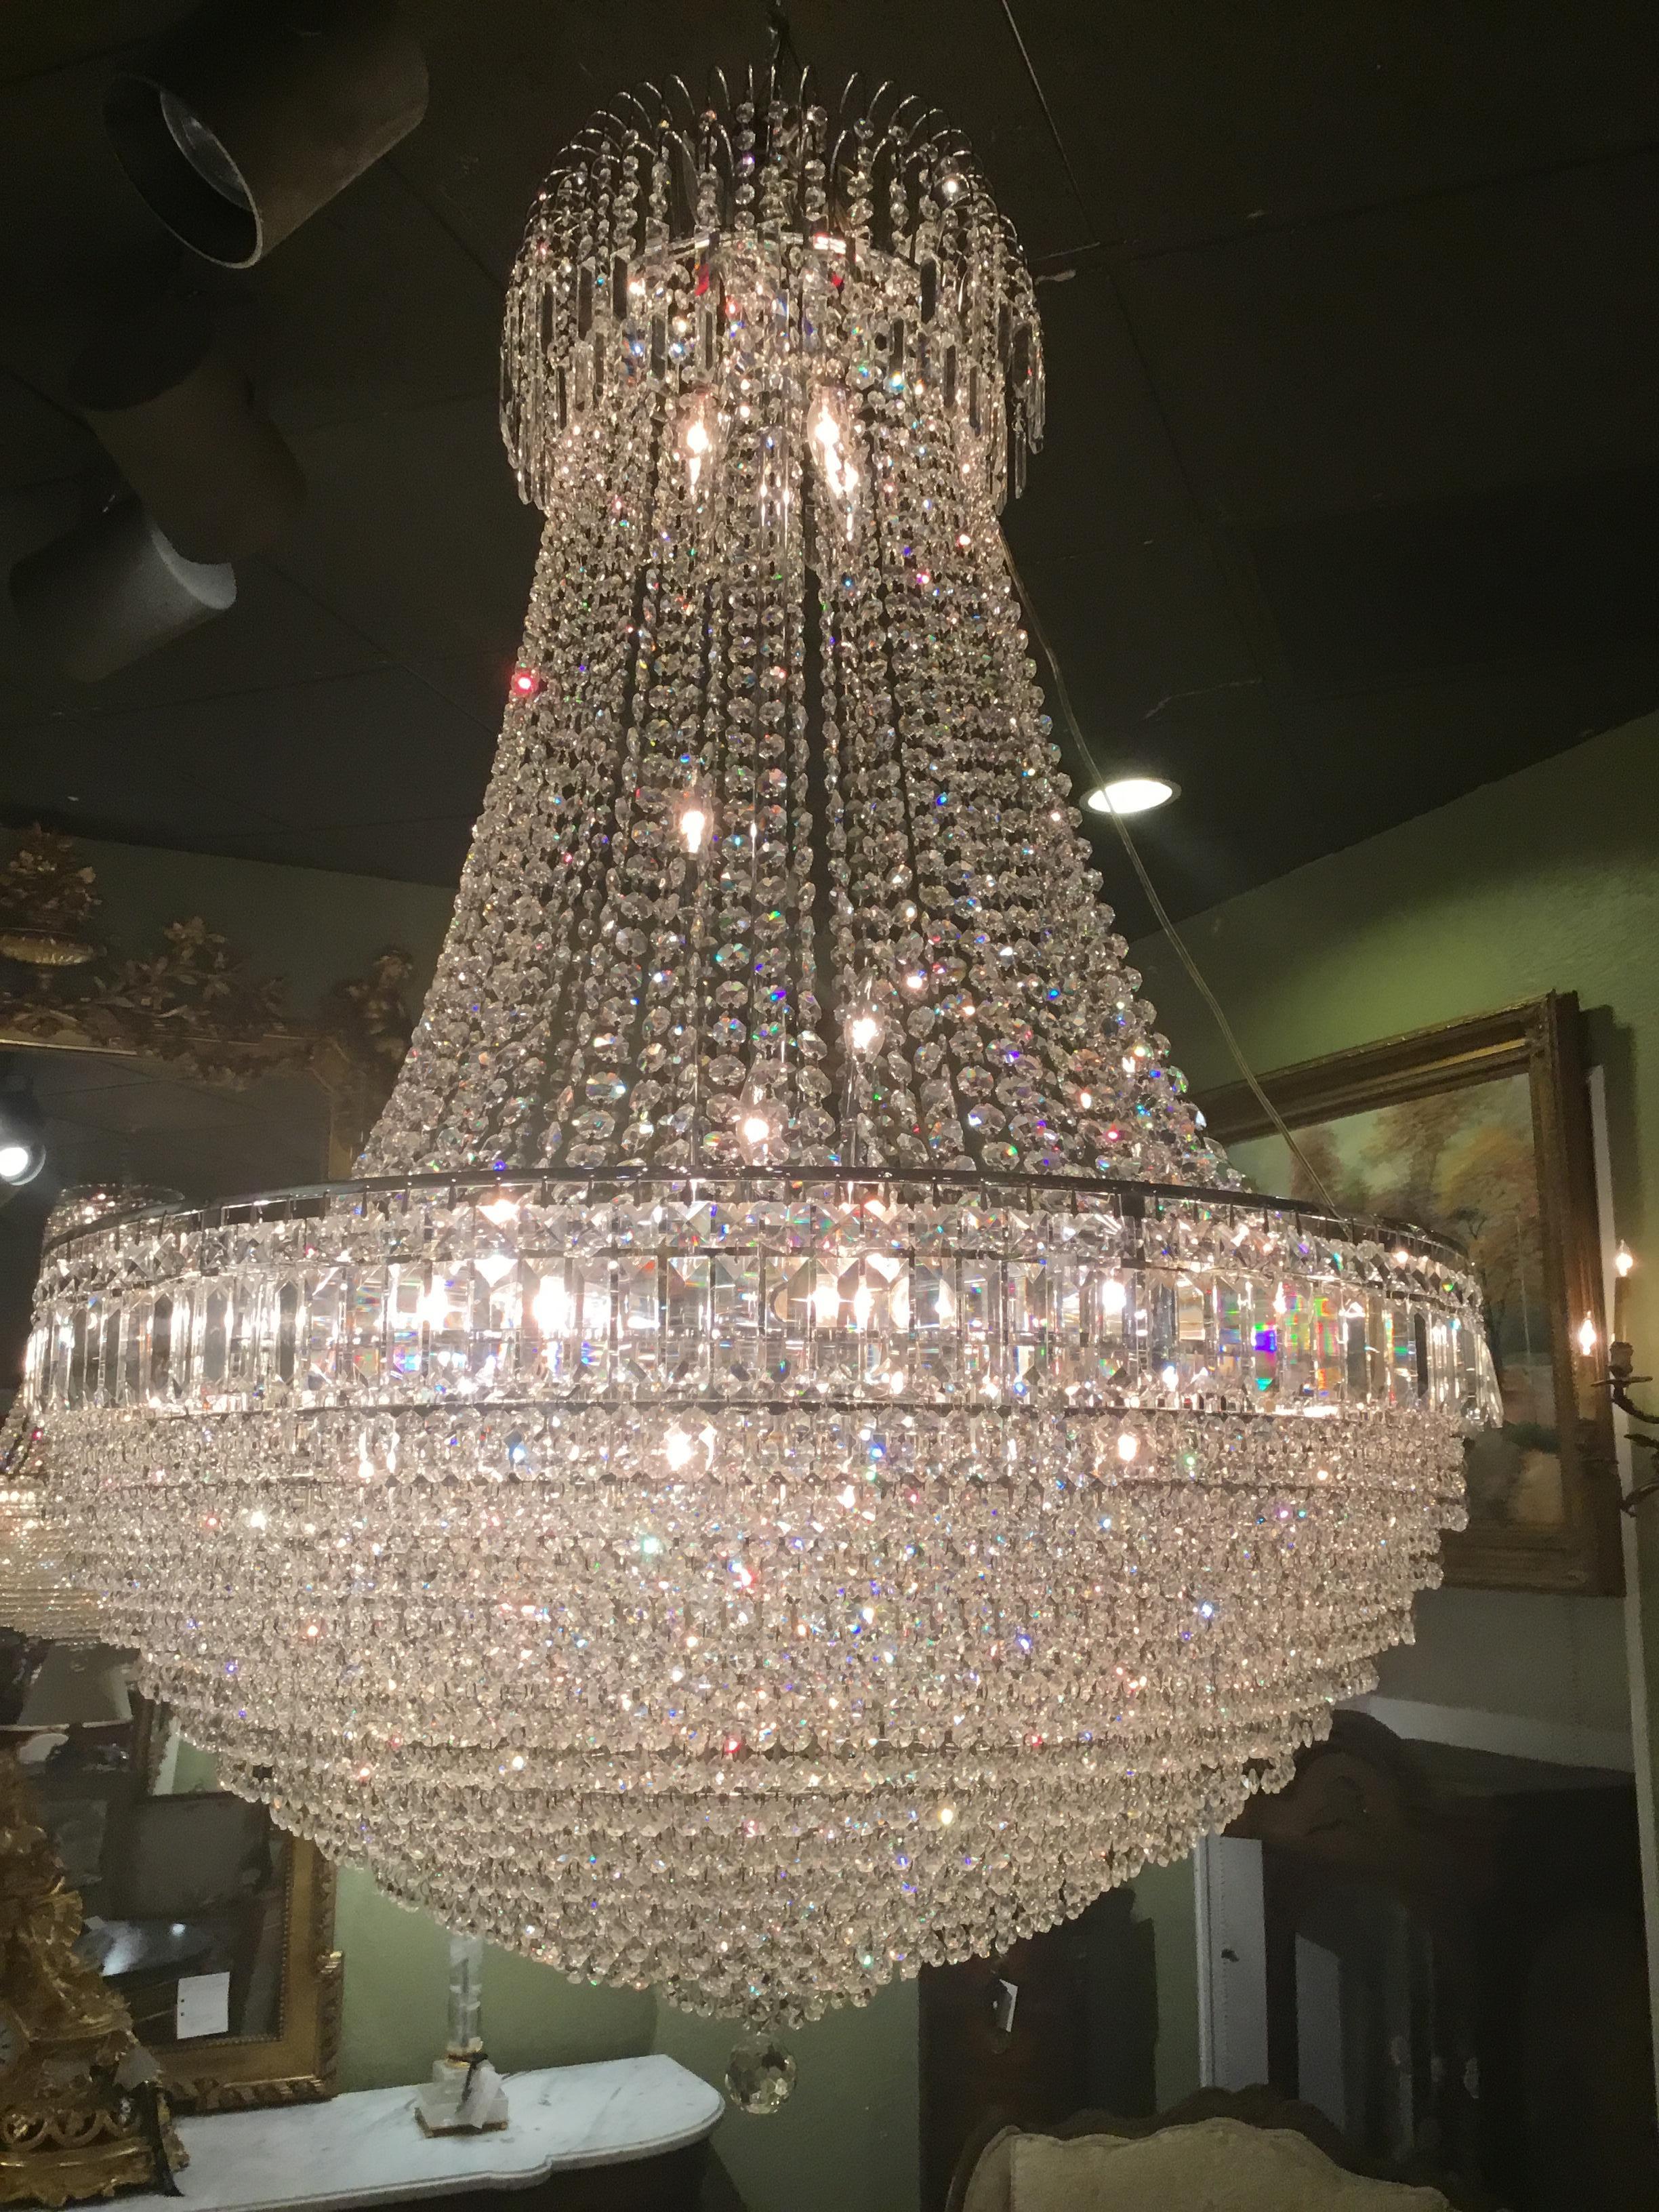 Straus crystal chandelier
Very large in size and the crystals have a lot of color!
Sworoski crystal.